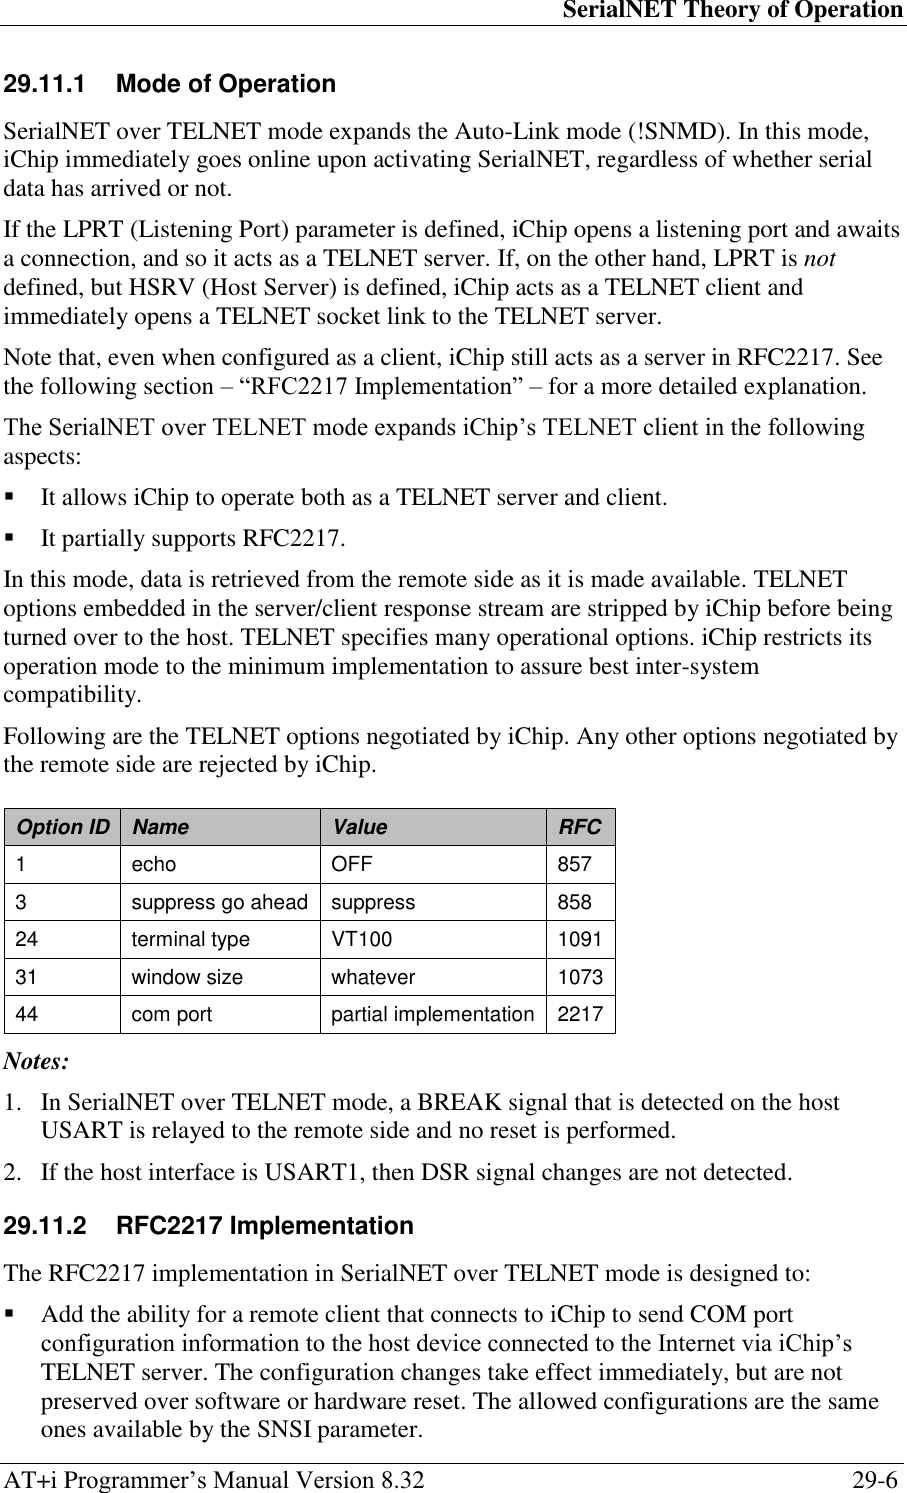 SerialNET Theory of Operation AT+i Programmer‘s Manual Version 8.32  29-6 29.11.1  Mode of Operation SerialNET over TELNET mode expands the Auto-Link mode (!SNMD). In this mode, iChip immediately goes online upon activating SerialNET, regardless of whether serial data has arrived or not. If the LPRT (Listening Port) parameter is defined, iChip opens a listening port and awaits a connection, and so it acts as a TELNET server. If, on the other hand, LPRT is not defined, but HSRV (Host Server) is defined, iChip acts as a TELNET client and immediately opens a TELNET socket link to the TELNET server. Note that, even when configured as a client, iChip still acts as a server in RFC2217. See the following section – ―RFC2217 Implementation‖ – for a more detailed explanation. The SerialNET over TELNET mode expands iChip‘s TELNET client in the following aspects:  It allows iChip to operate both as a TELNET server and client.  It partially supports RFC2217. In this mode, data is retrieved from the remote side as it is made available. TELNET options embedded in the server/client response stream are stripped by iChip before being turned over to the host. TELNET specifies many operational options. iChip restricts its operation mode to the minimum implementation to assure best inter-system compatibility. Following are the TELNET options negotiated by iChip. Any other options negotiated by the remote side are rejected by iChip.  Option ID Name Value RFC 1 echo OFF 857 3 suppress go ahead suppress 858 24 terminal type VT100 1091 31 window size whatever 1073 44 com port partial implementation 2217 Notes: 1. In SerialNET over TELNET mode, a BREAK signal that is detected on the host USART is relayed to the remote side and no reset is performed. 2. If the host interface is USART1, then DSR signal changes are not detected. 29.11.2  RFC2217 Implementation The RFC2217 implementation in SerialNET over TELNET mode is designed to:  Add the ability for a remote client that connects to iChip to send COM port configuration information to the host device connected to the Internet via iChip‘s TELNET server. The configuration changes take effect immediately, but are not preserved over software or hardware reset. The allowed configurations are the same ones available by the SNSI parameter. 